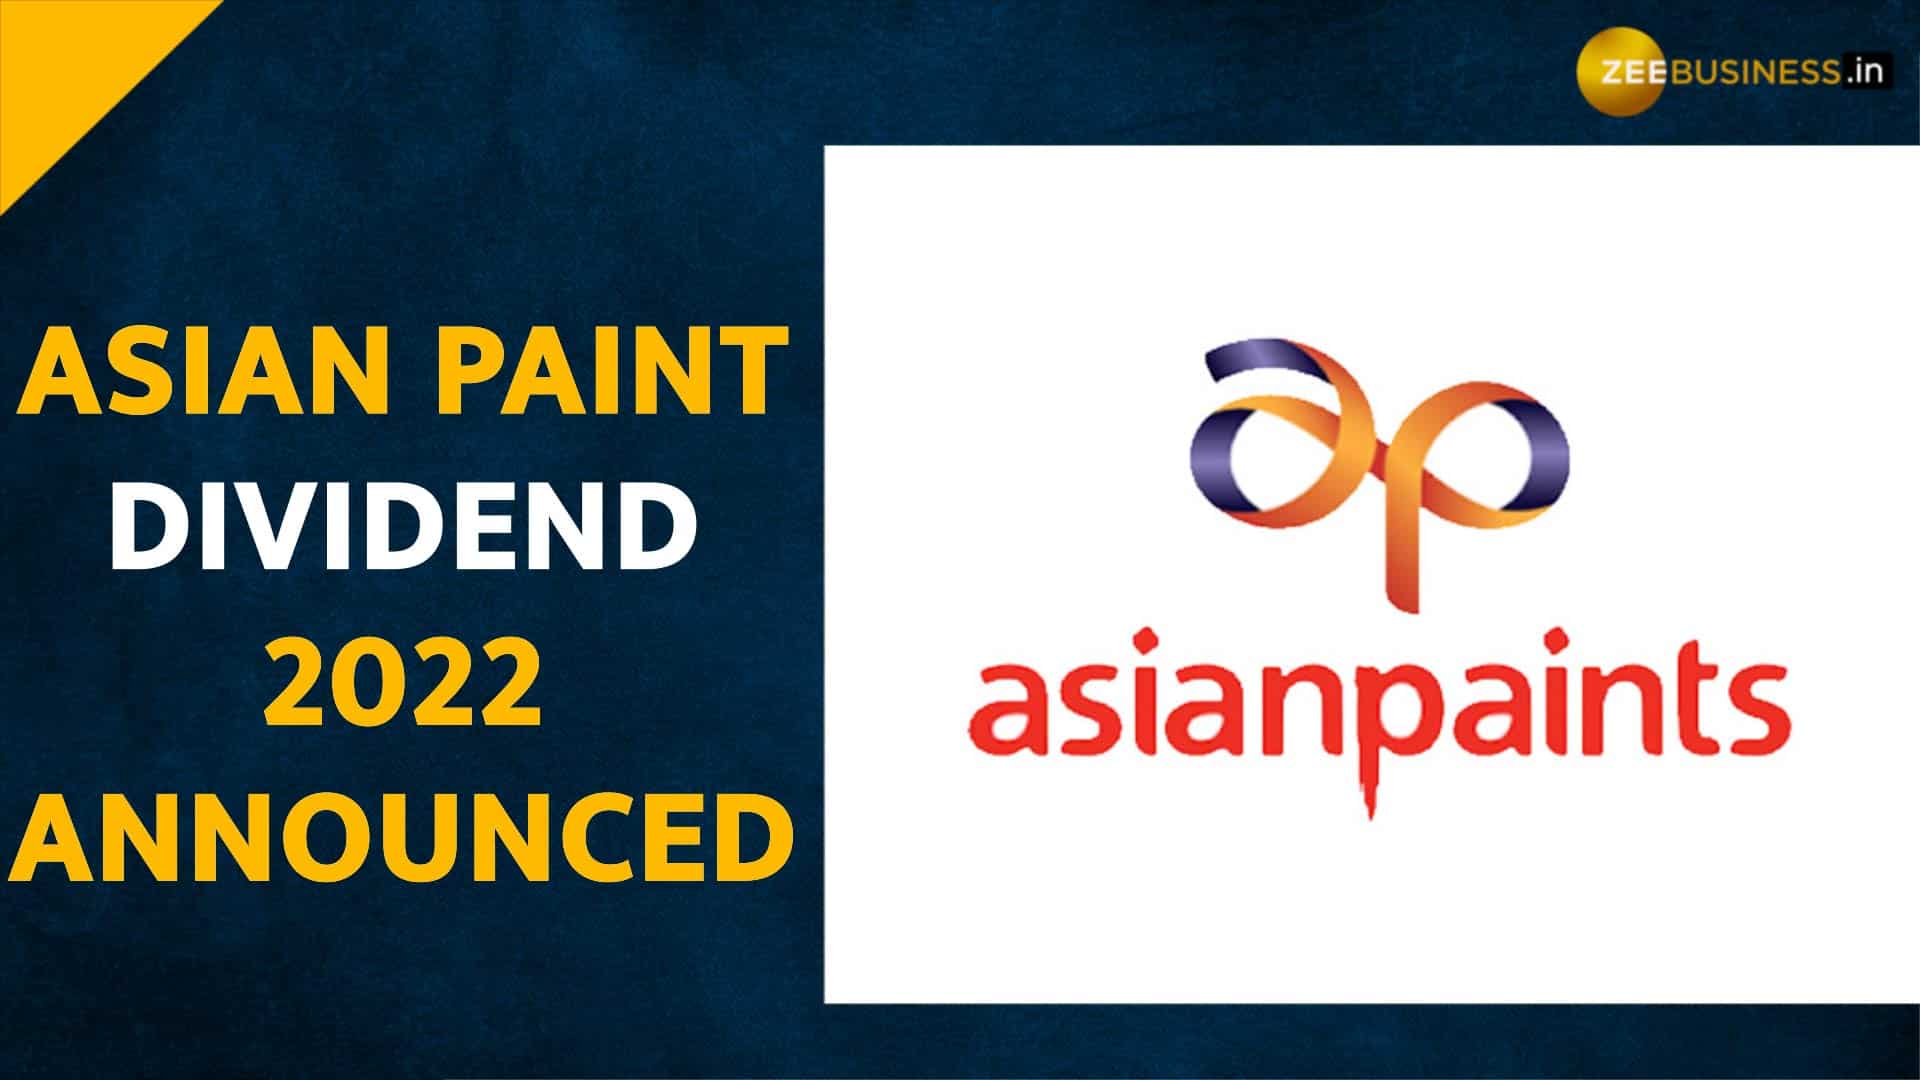 Asian paints dividend 2022 announced, pay 440 whopping dividendCheck